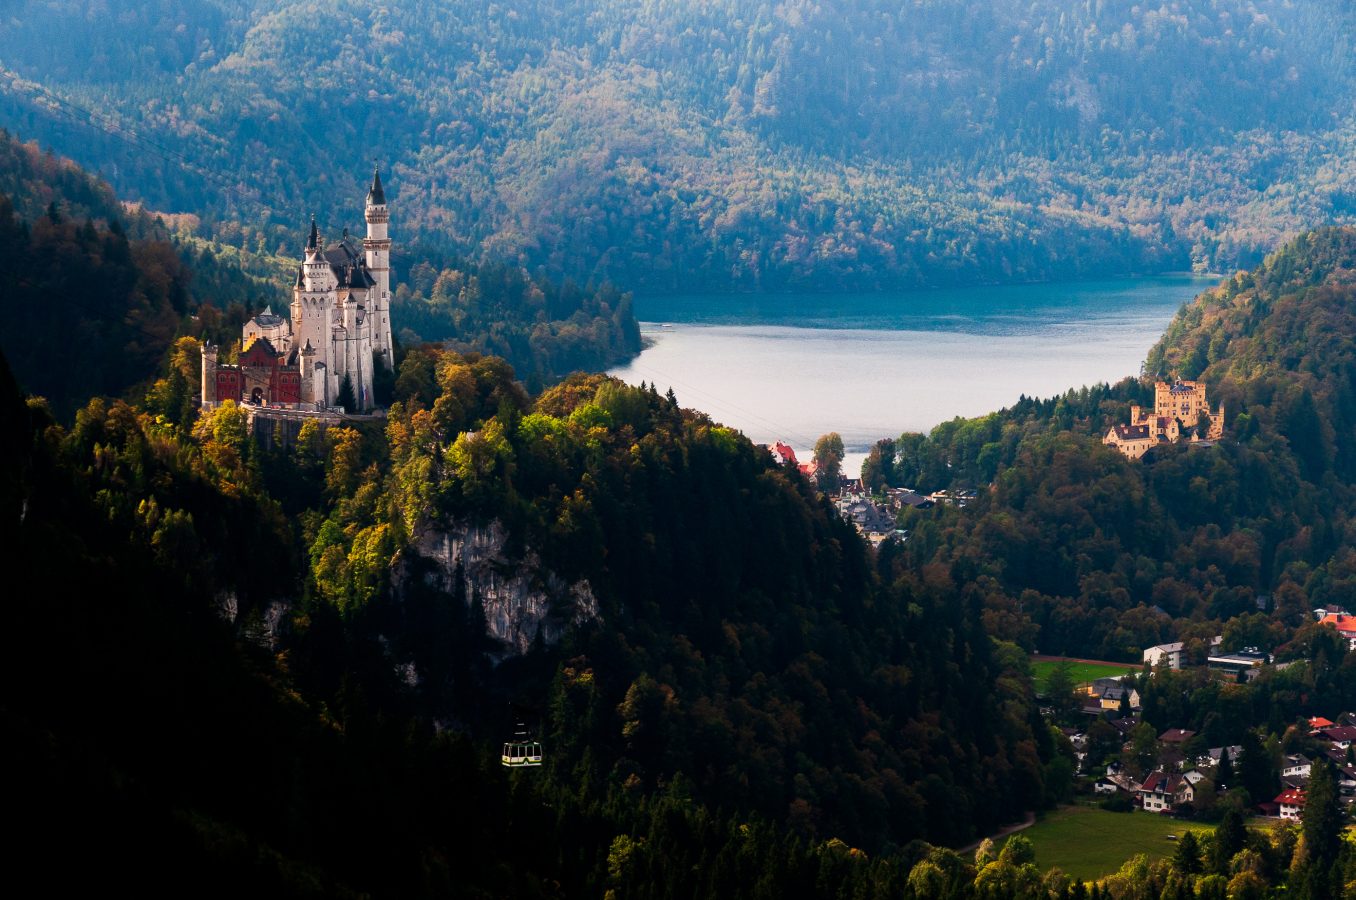 Neuschwanstein Castle on a hill in the Bavarian landscape with lake in background.